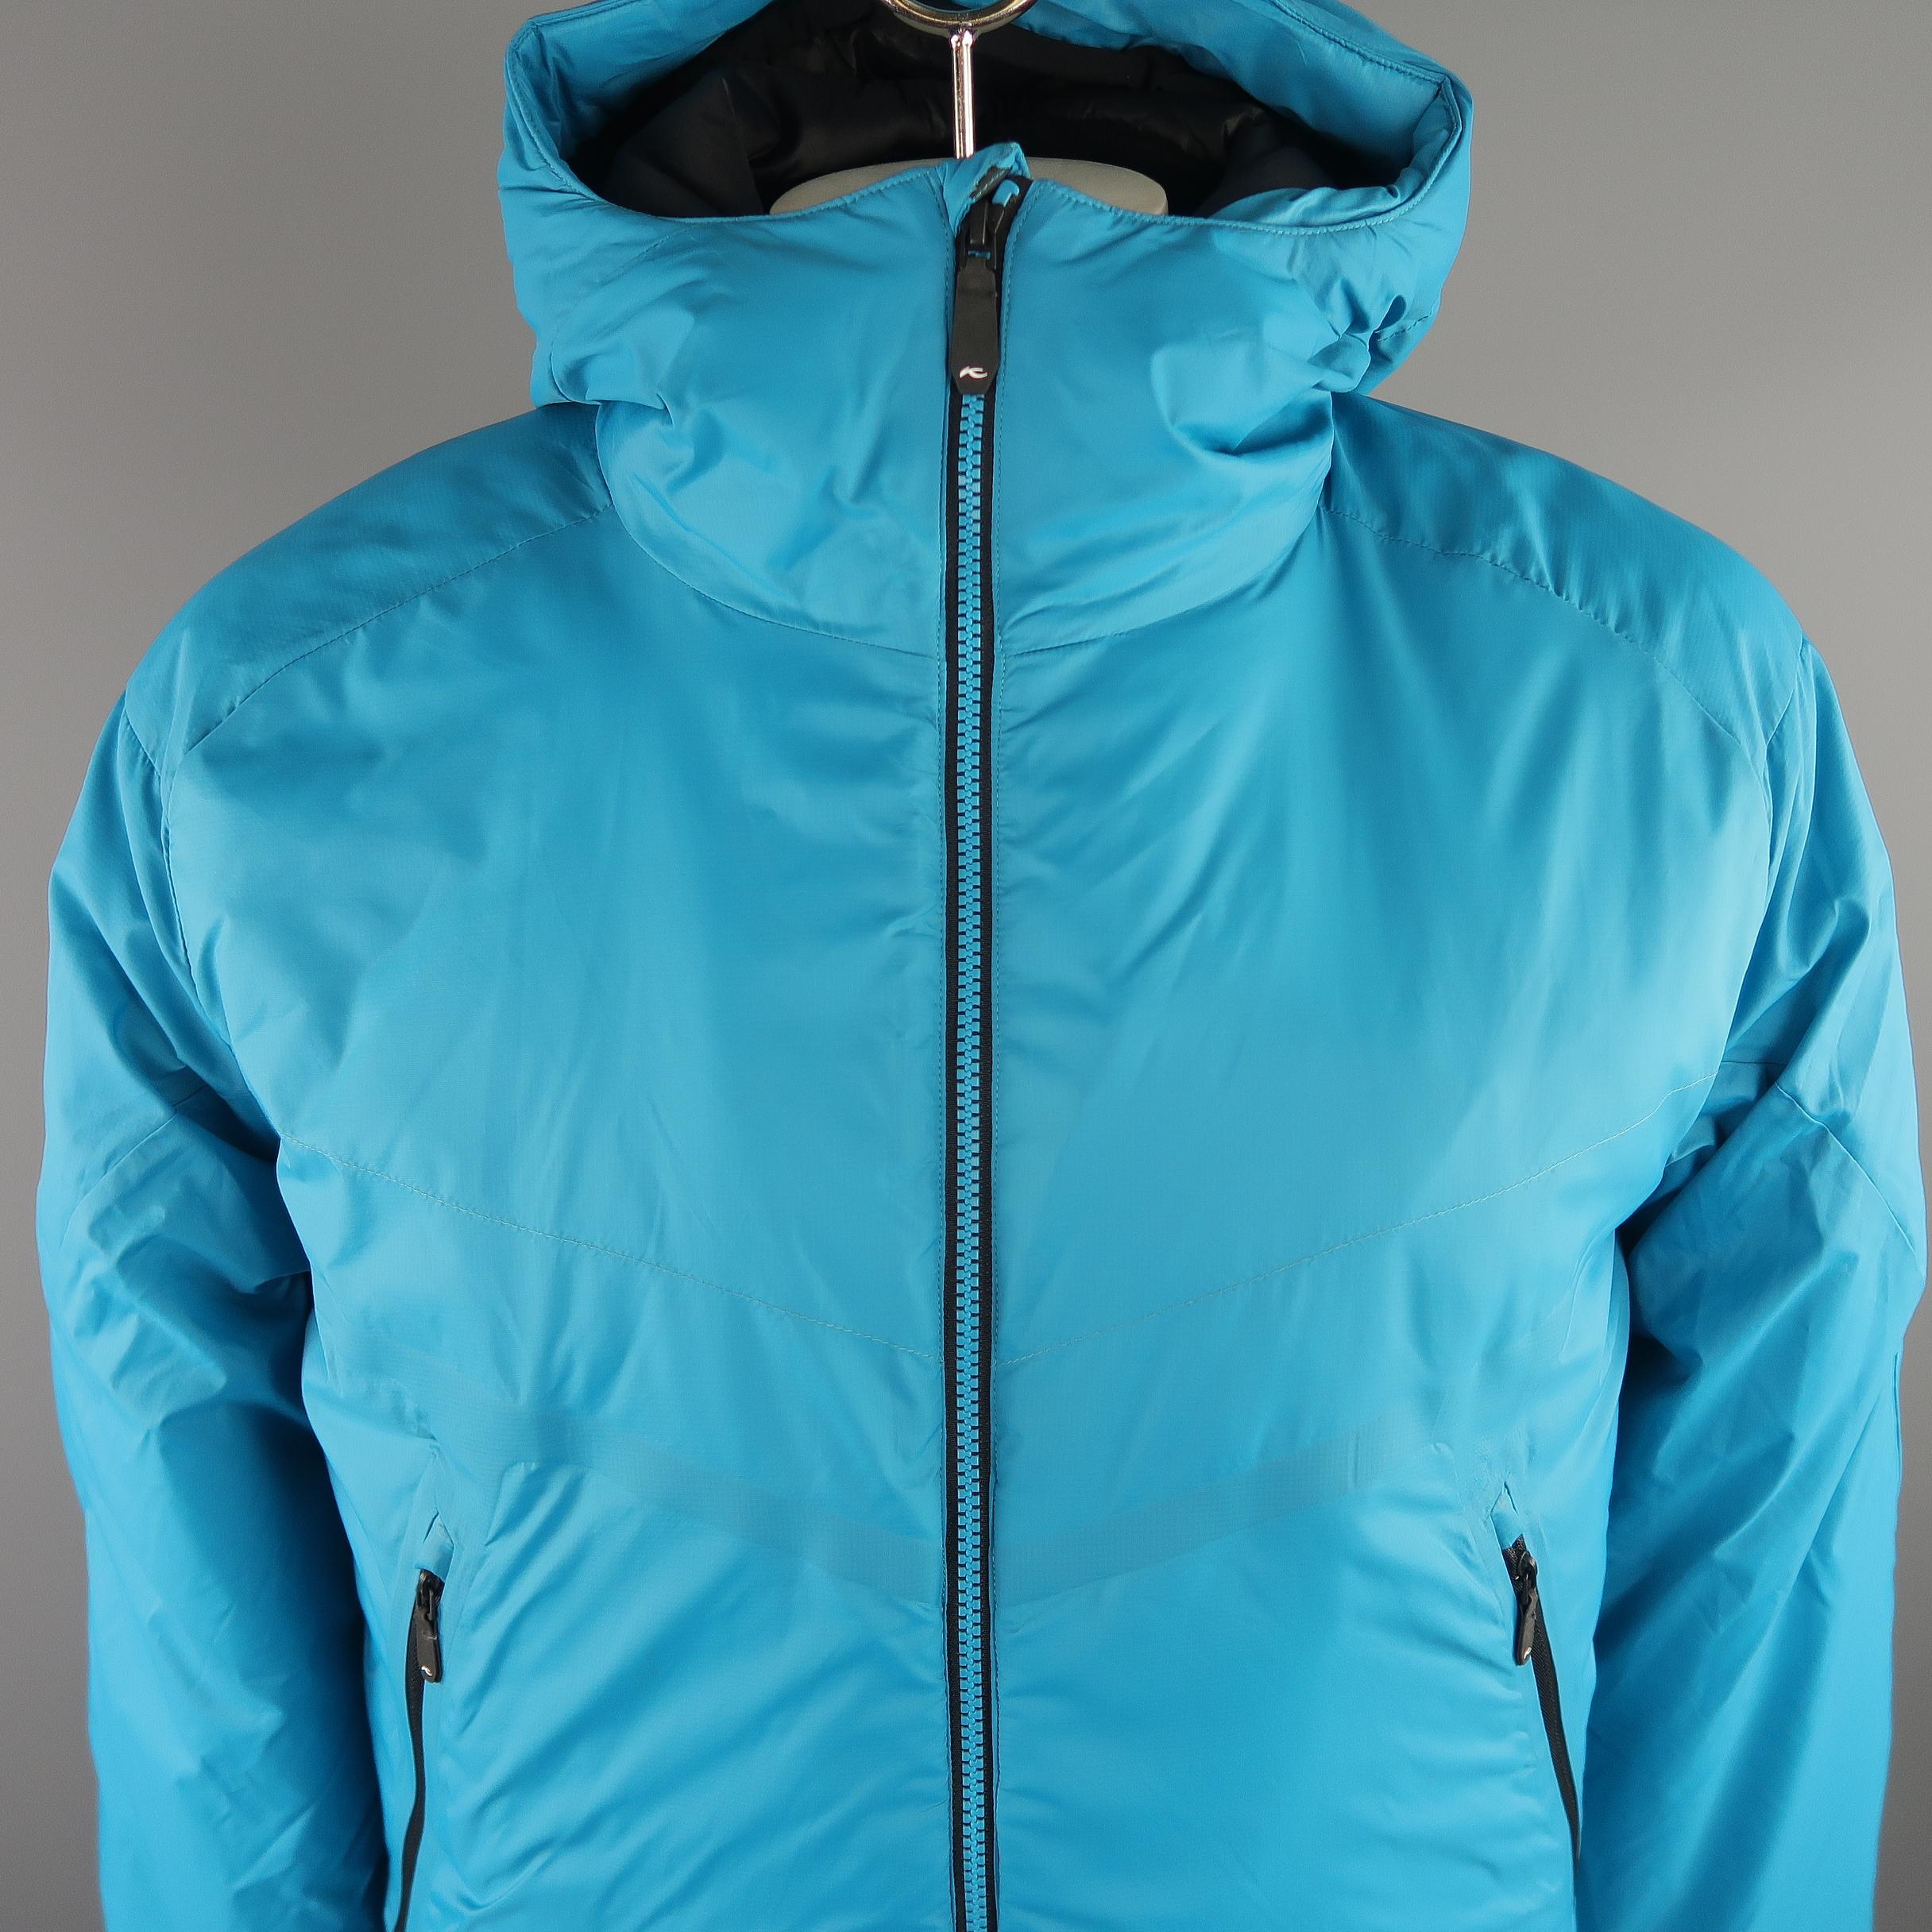 KJUS  filled hooded  jacket comes in a light weight aqua tone in polyamide solid material, zip up, slit pockets. Made in Italy.
 
New without Tags.
Marked: 52 / L  
 
Measurements:
 
Shoulder: 20 in.
Chest: 46 in.
Sleeve: 27 in.
Length: 30 in.